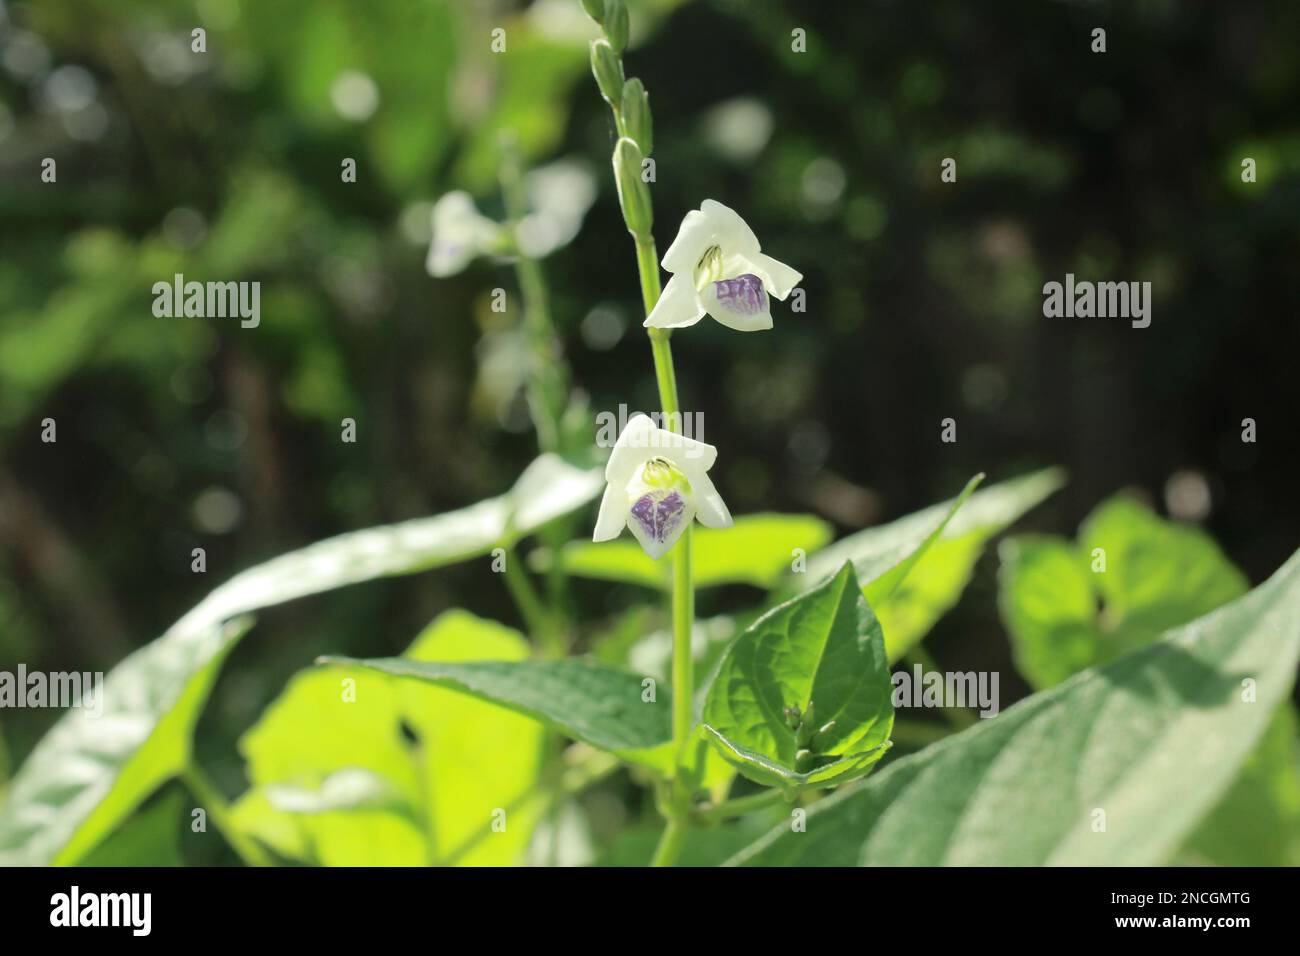 Asystasia gangetica is a species of plant in the family Acanthaceae. It is commonly known as the Chinese violet, coromandel or creeping foxglove. Stock Photo